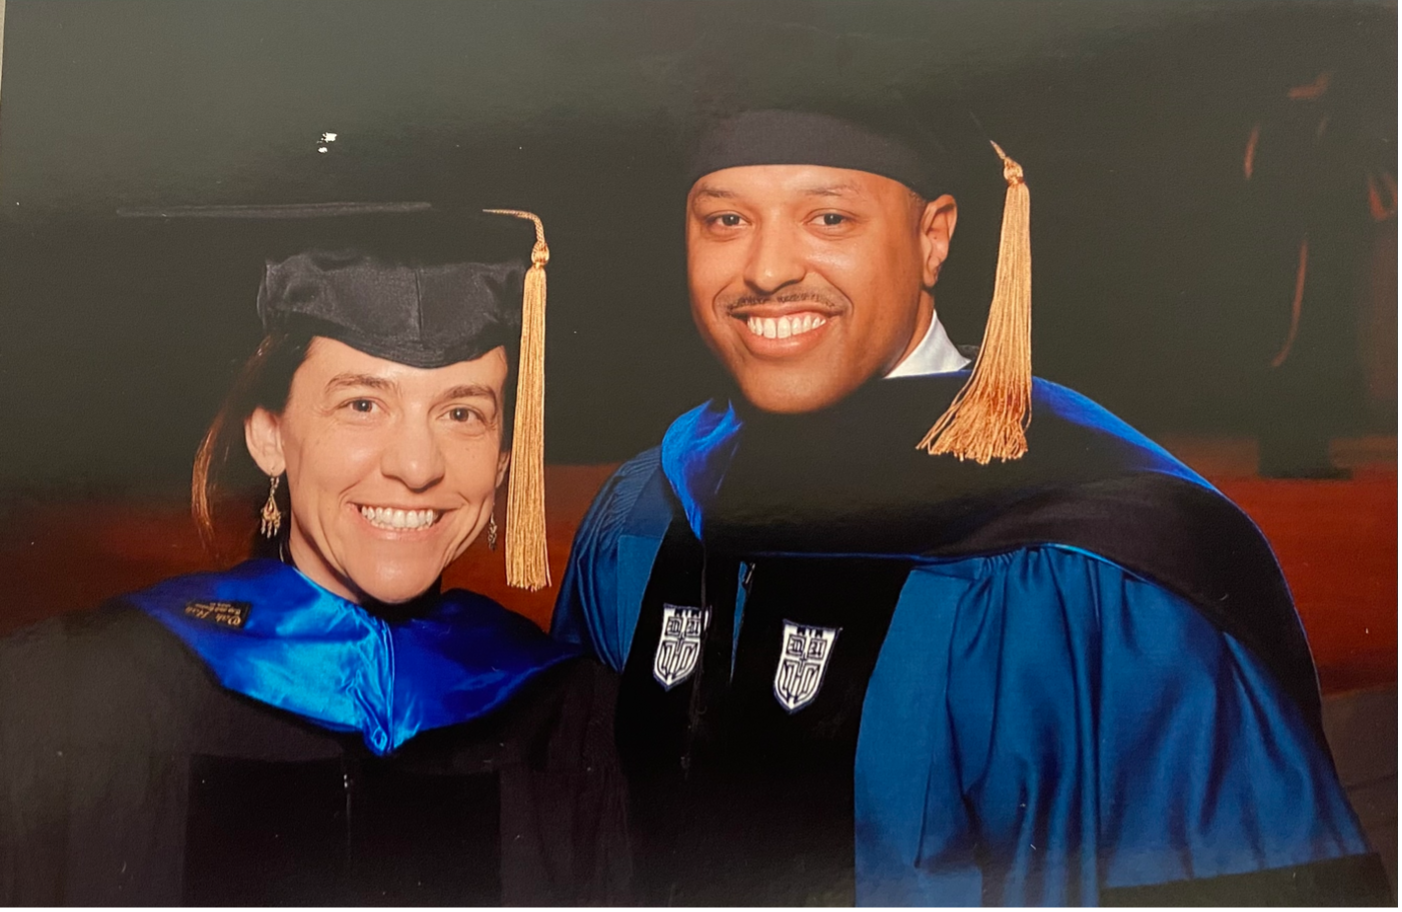 Georgia Tomaras and Kevin Saunders in cap and gown